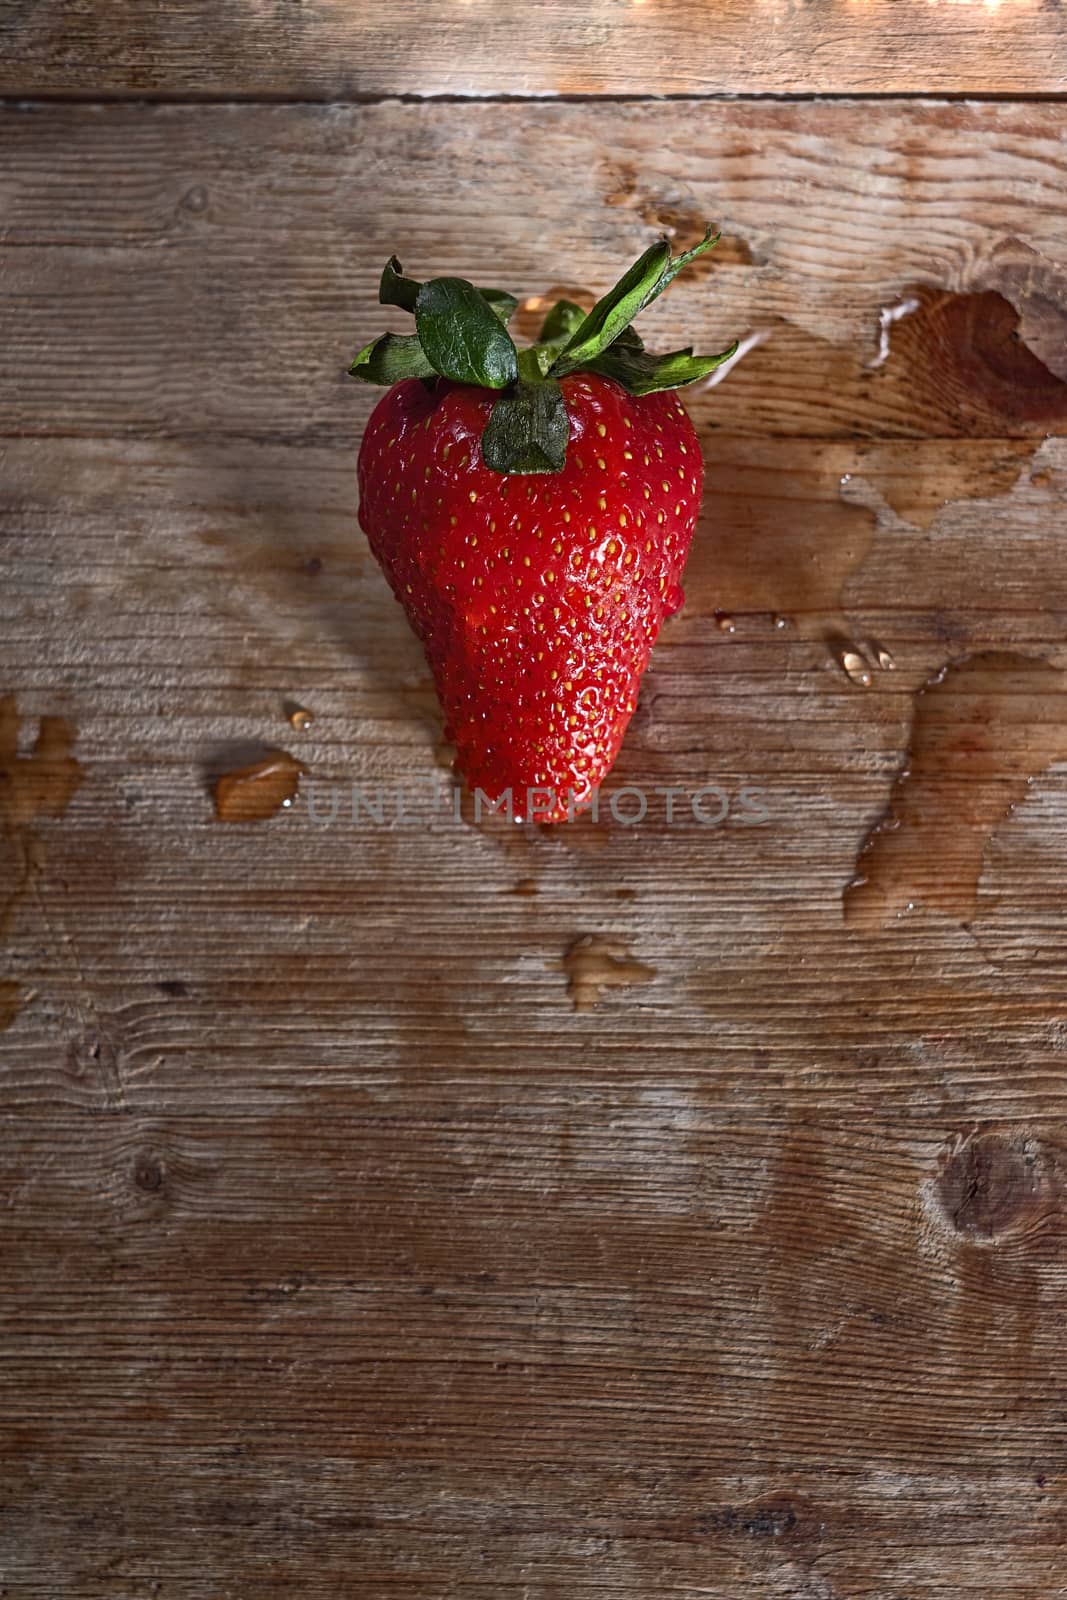 strawberry on the basis of wood and water drops